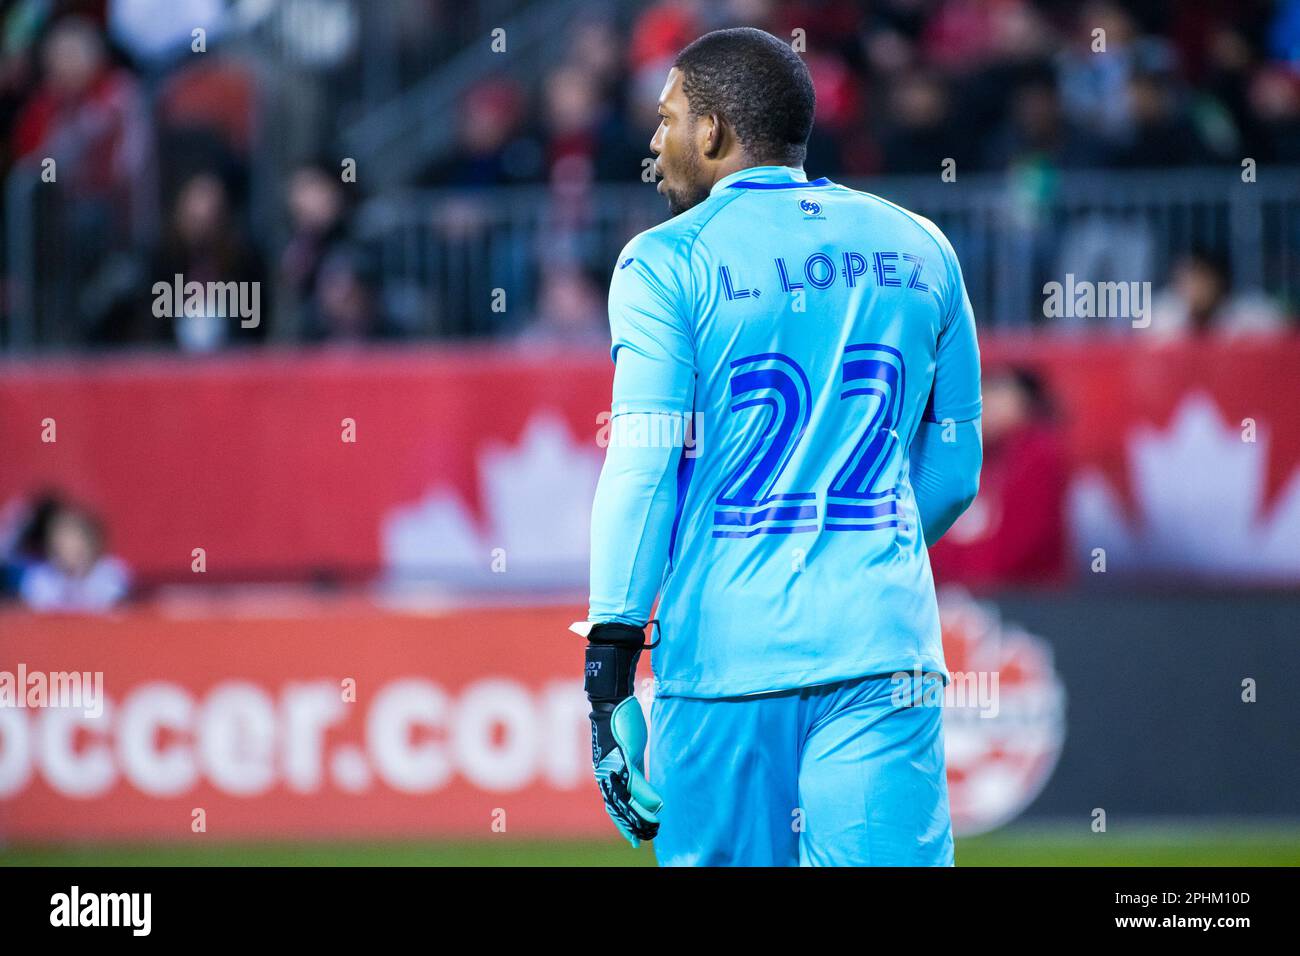 Toronto, Canada. 28th Mar, 2023. Luis Lopez #22 of Honduras team in action during the CONCACAF Nations League qualifier game between Canada and Honduras at BMO field in Toronto. The game ended 4-1 for Canada sending it to the semifinals. Credit: SOPA Images Limited/Alamy Live News Stock Photo